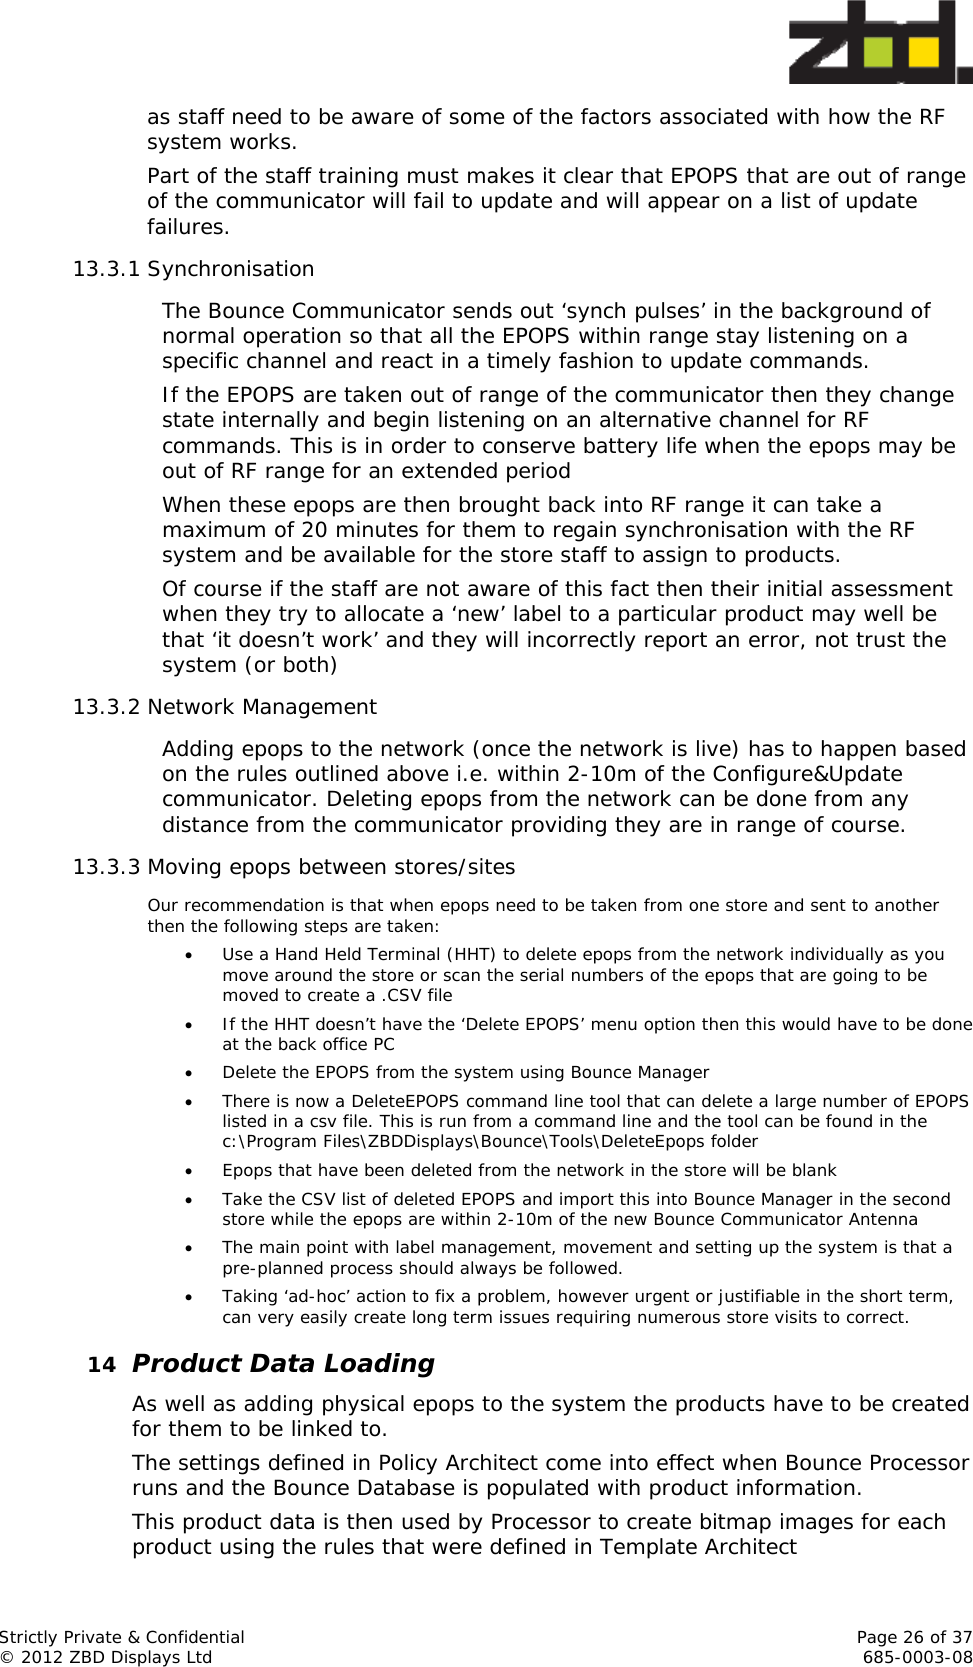  Strictly Private &amp; Confidential    Page 26 of 37 © 2012 ZBD Displays Ltd     685-0003-08 as staff need to be aware of some of the factors associated with how the RF system works. Part of the staff training must makes it clear that EPOPS that are out of range of the communicator will fail to update and will appear on a list of update failures.  13.3.1 Synchronisation The Bounce Communicator sends out ‘synch pulses’ in the background of normal operation so that all the EPOPS within range stay listening on a specific channel and react in a timely fashion to update commands. If the EPOPS are taken out of range of the communicator then they change state internally and begin listening on an alternative channel for RF commands. This is in order to conserve battery life when the epops may be out of RF range for an extended period When these epops are then brought back into RF range it can take a maximum of 20 minutes for them to regain synchronisation with the RF system and be available for the store staff to assign to products.  Of course if the staff are not aware of this fact then their initial assessment when they try to allocate a ‘new’ label to a particular product may well be that ‘it doesn’t work’ and they will incorrectly report an error, not trust the system (or both) 13.3.2 Network Management Adding epops to the network (once the network is live) has to happen based on the rules outlined above i.e. within 2-10m of the Configure&amp;Update communicator. Deleting epops from the network can be done from any distance from the communicator providing they are in range of course. 13.3.3 Moving epops between stores/sites Our recommendation is that when epops need to be taken from one store and sent to another then the following steps are taken:  Use a Hand Held Terminal (HHT) to delete epops from the network individually as you move around the store or scan the serial numbers of the epops that are going to be moved to create a .CSV file  If the HHT doesn’t have the ‘Delete EPOPS’ menu option then this would have to be done at the back office PC  Delete the EPOPS from the system using Bounce Manager  There is now a DeleteEPOPS command line tool that can delete a large number of EPOPS listed in a csv file. This is run from a command line and the tool can be found in the c:\Program Files\ZBDDisplays\Bounce\Tools\DeleteEpops folder  Epops that have been deleted from the network in the store will be blank  Take the CSV list of deleted EPOPS and import this into Bounce Manager in the second store while the epops are within 2-10m of the new Bounce Communicator Antenna  The main point with label management, movement and setting up the system is that a pre-planned process should always be followed.   Taking ‘ad-hoc’ action to fix a problem, however urgent or justifiable in the short term, can very easily create long term issues requiring numerous store visits to correct.  14 Product Data Loading As well as adding physical epops to the system the products have to be created for them to be linked to.  The settings defined in Policy Architect come into effect when Bounce Processor runs and the Bounce Database is populated with product information.  This product data is then used by Processor to create bitmap images for each product using the rules that were defined in Template Architect 